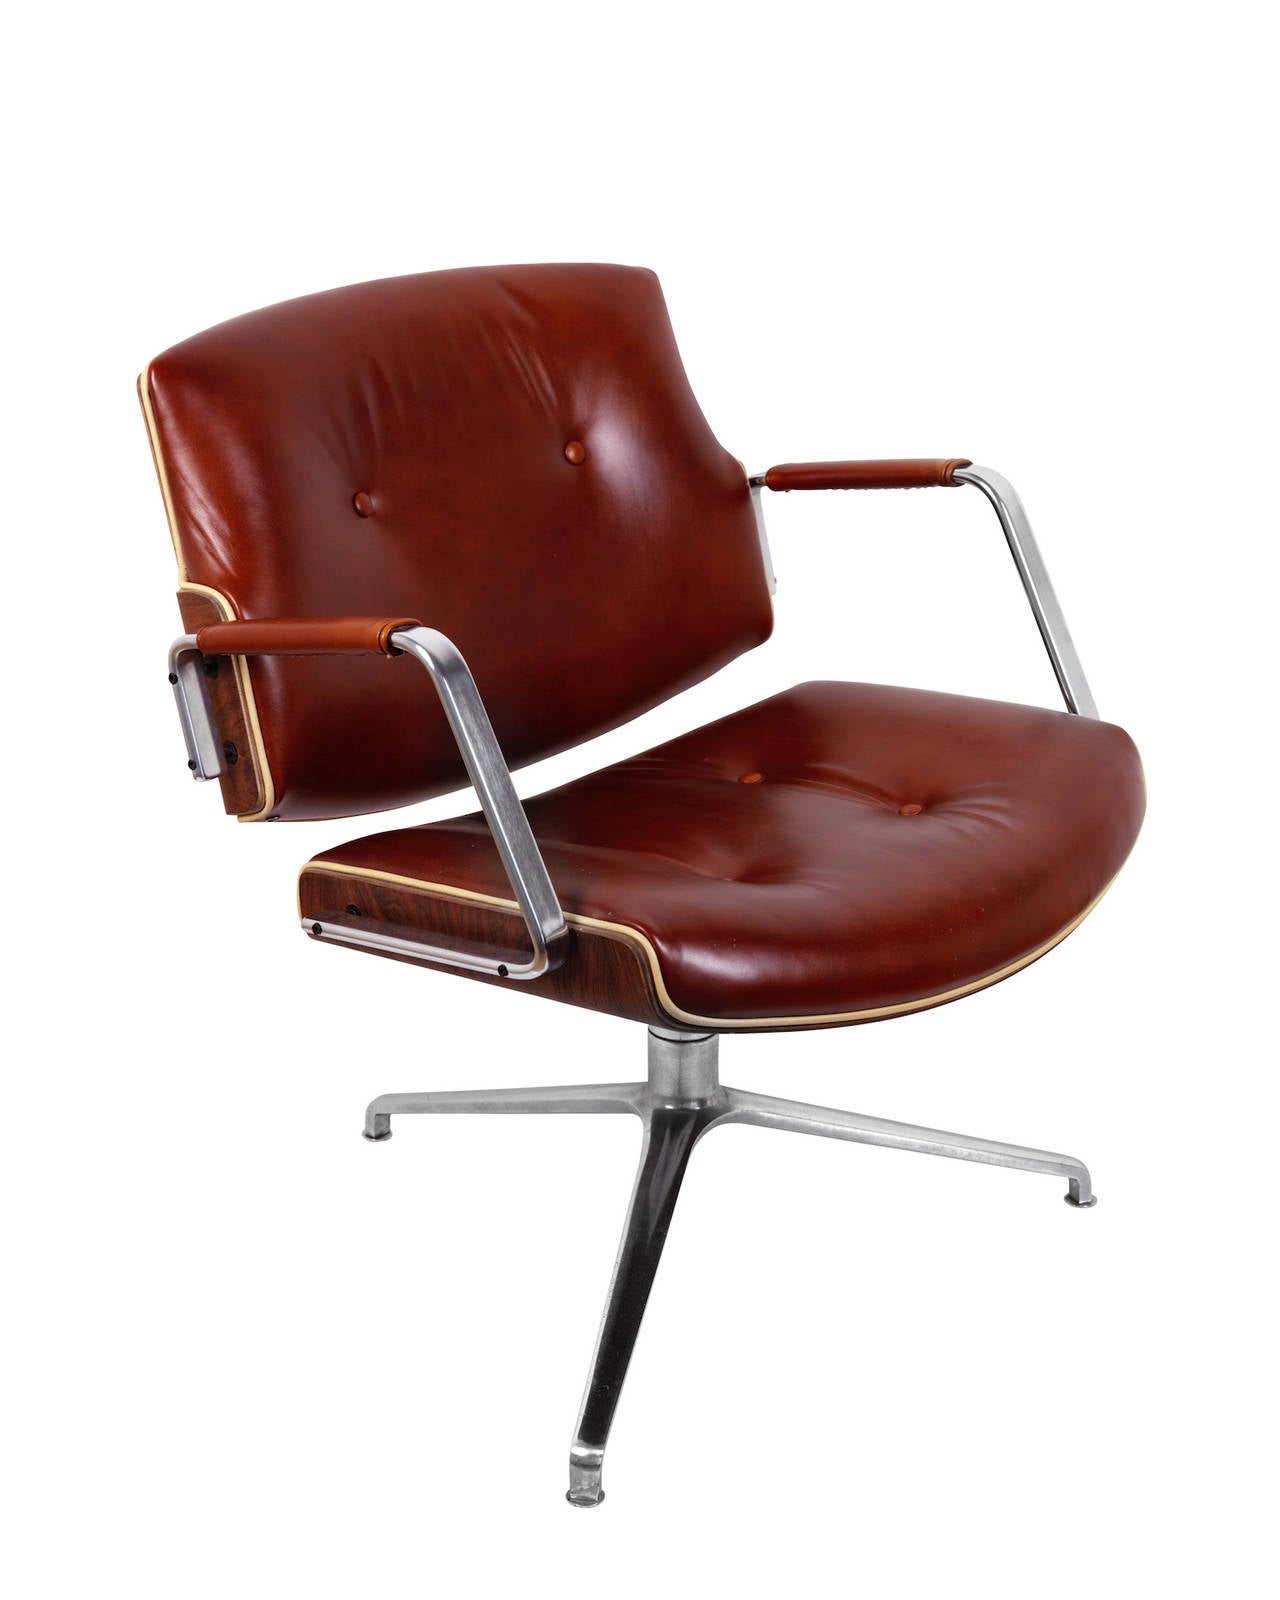 Office chair, model FK-84. Rosewood back, aluminium legs with casters, swivel function. Brown leather upholstery. Produced by Kill International.